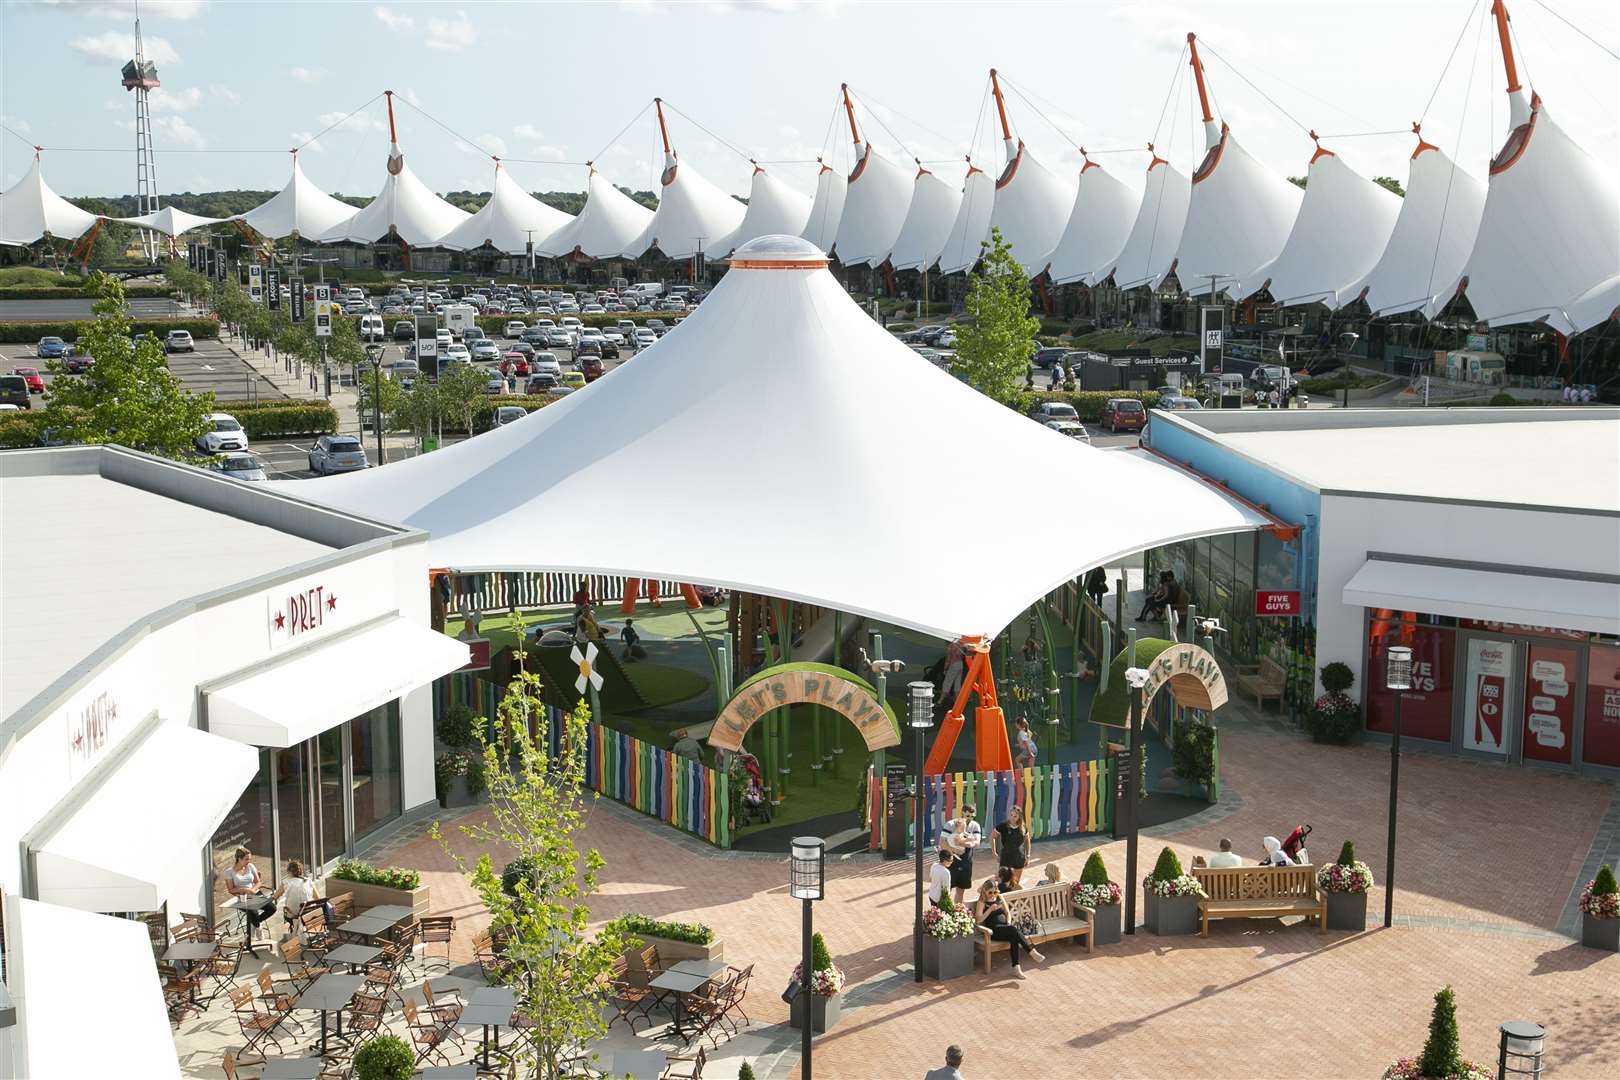 Joules has also been saved at the Ashford Designer Outlet